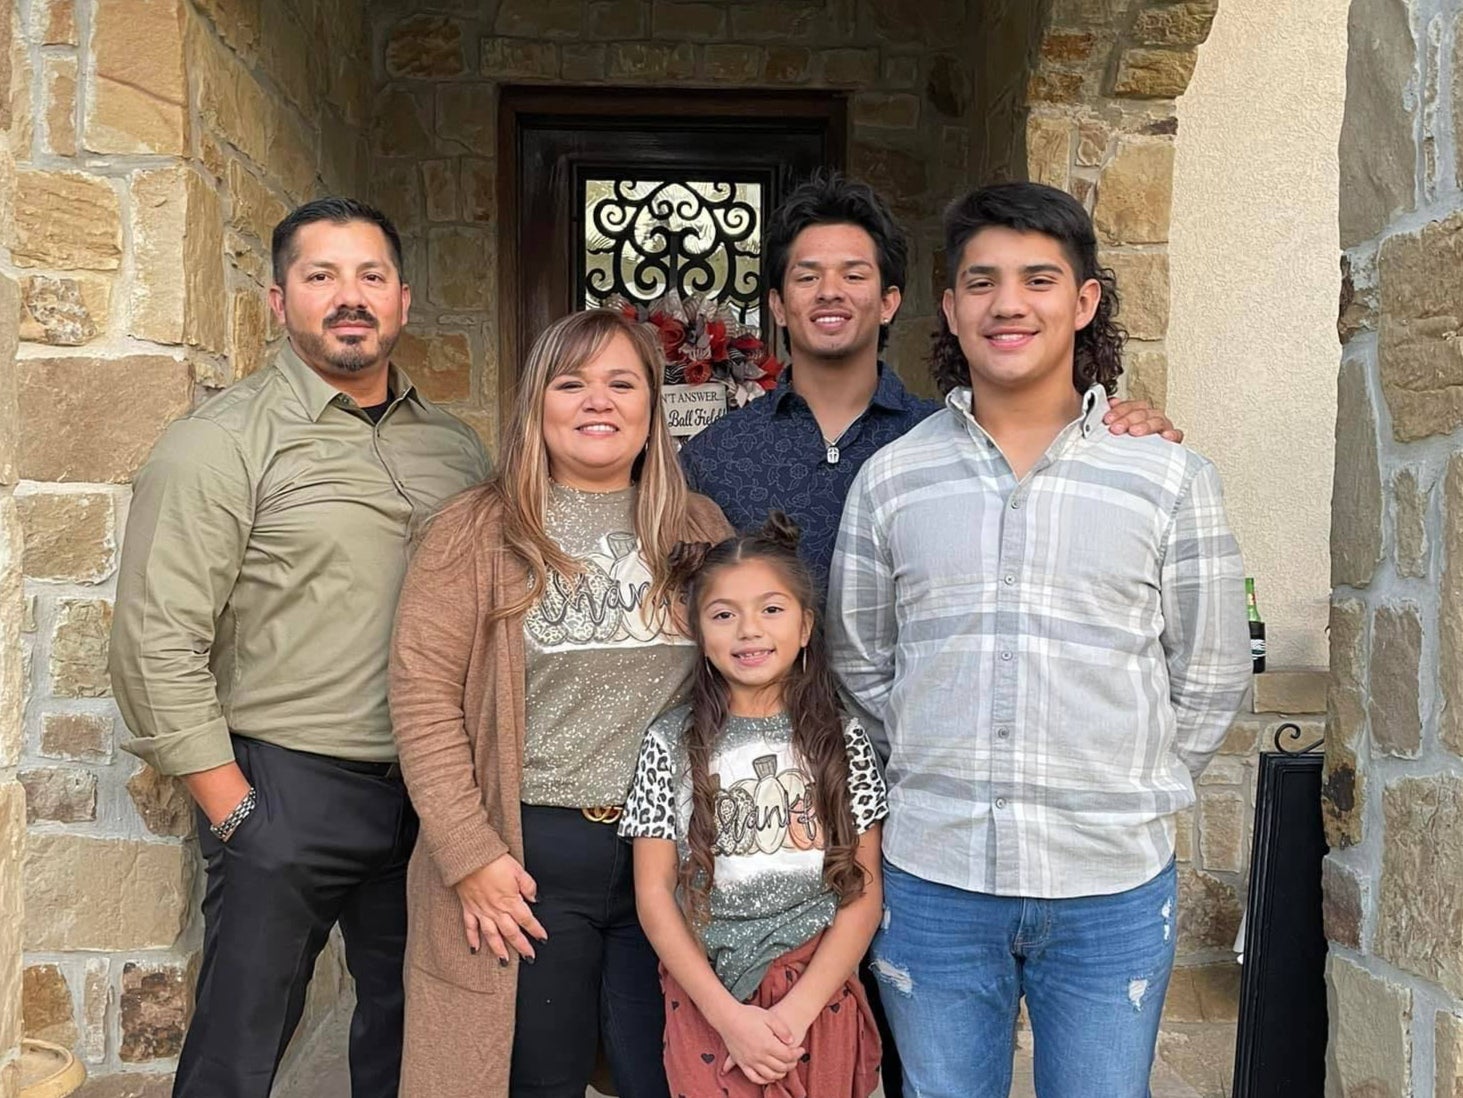 A picture of Jacob Alabarado, a CBP officer, and his family